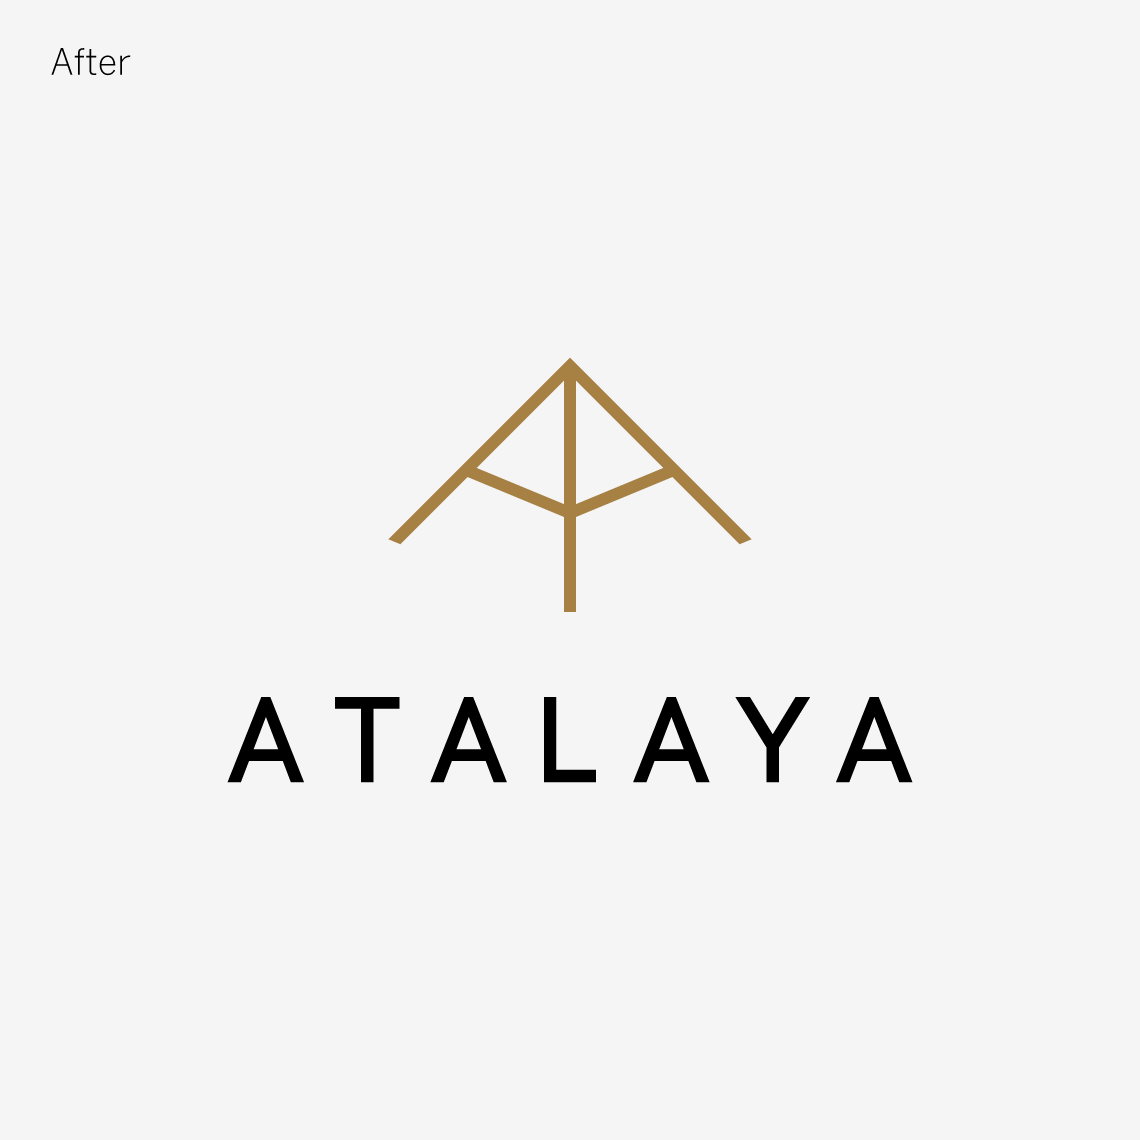 the new logo for Atalaya developed for MBLM